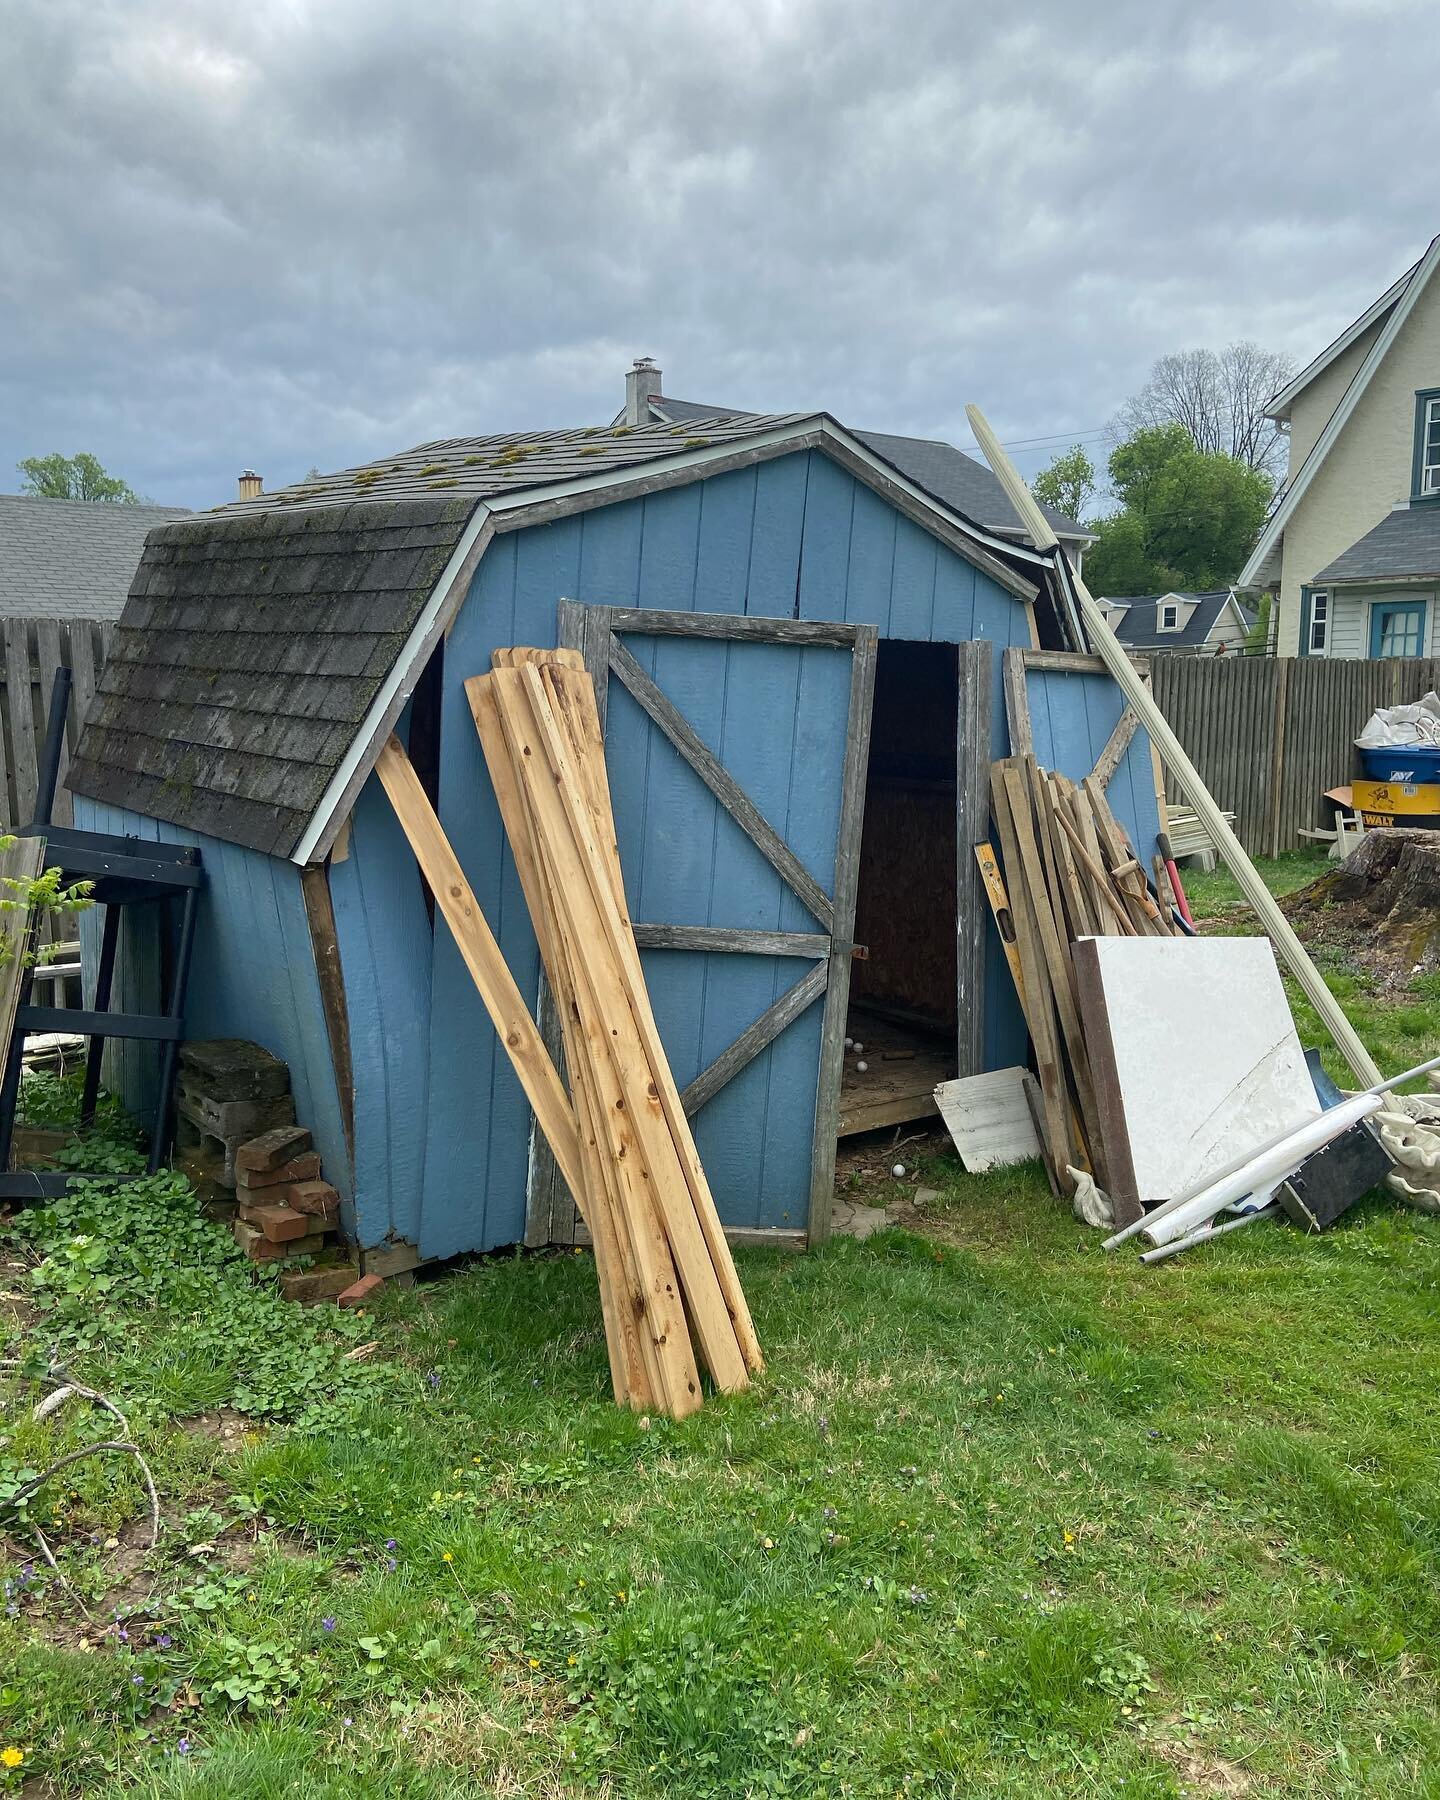 Small shed demolished and hauled away in 30 minutes. We specialize in demolition and major in junk removal. Call us to today to schedule  your free estimate. #demolition #hauling #junkremoval #cleanouts #deconstruction